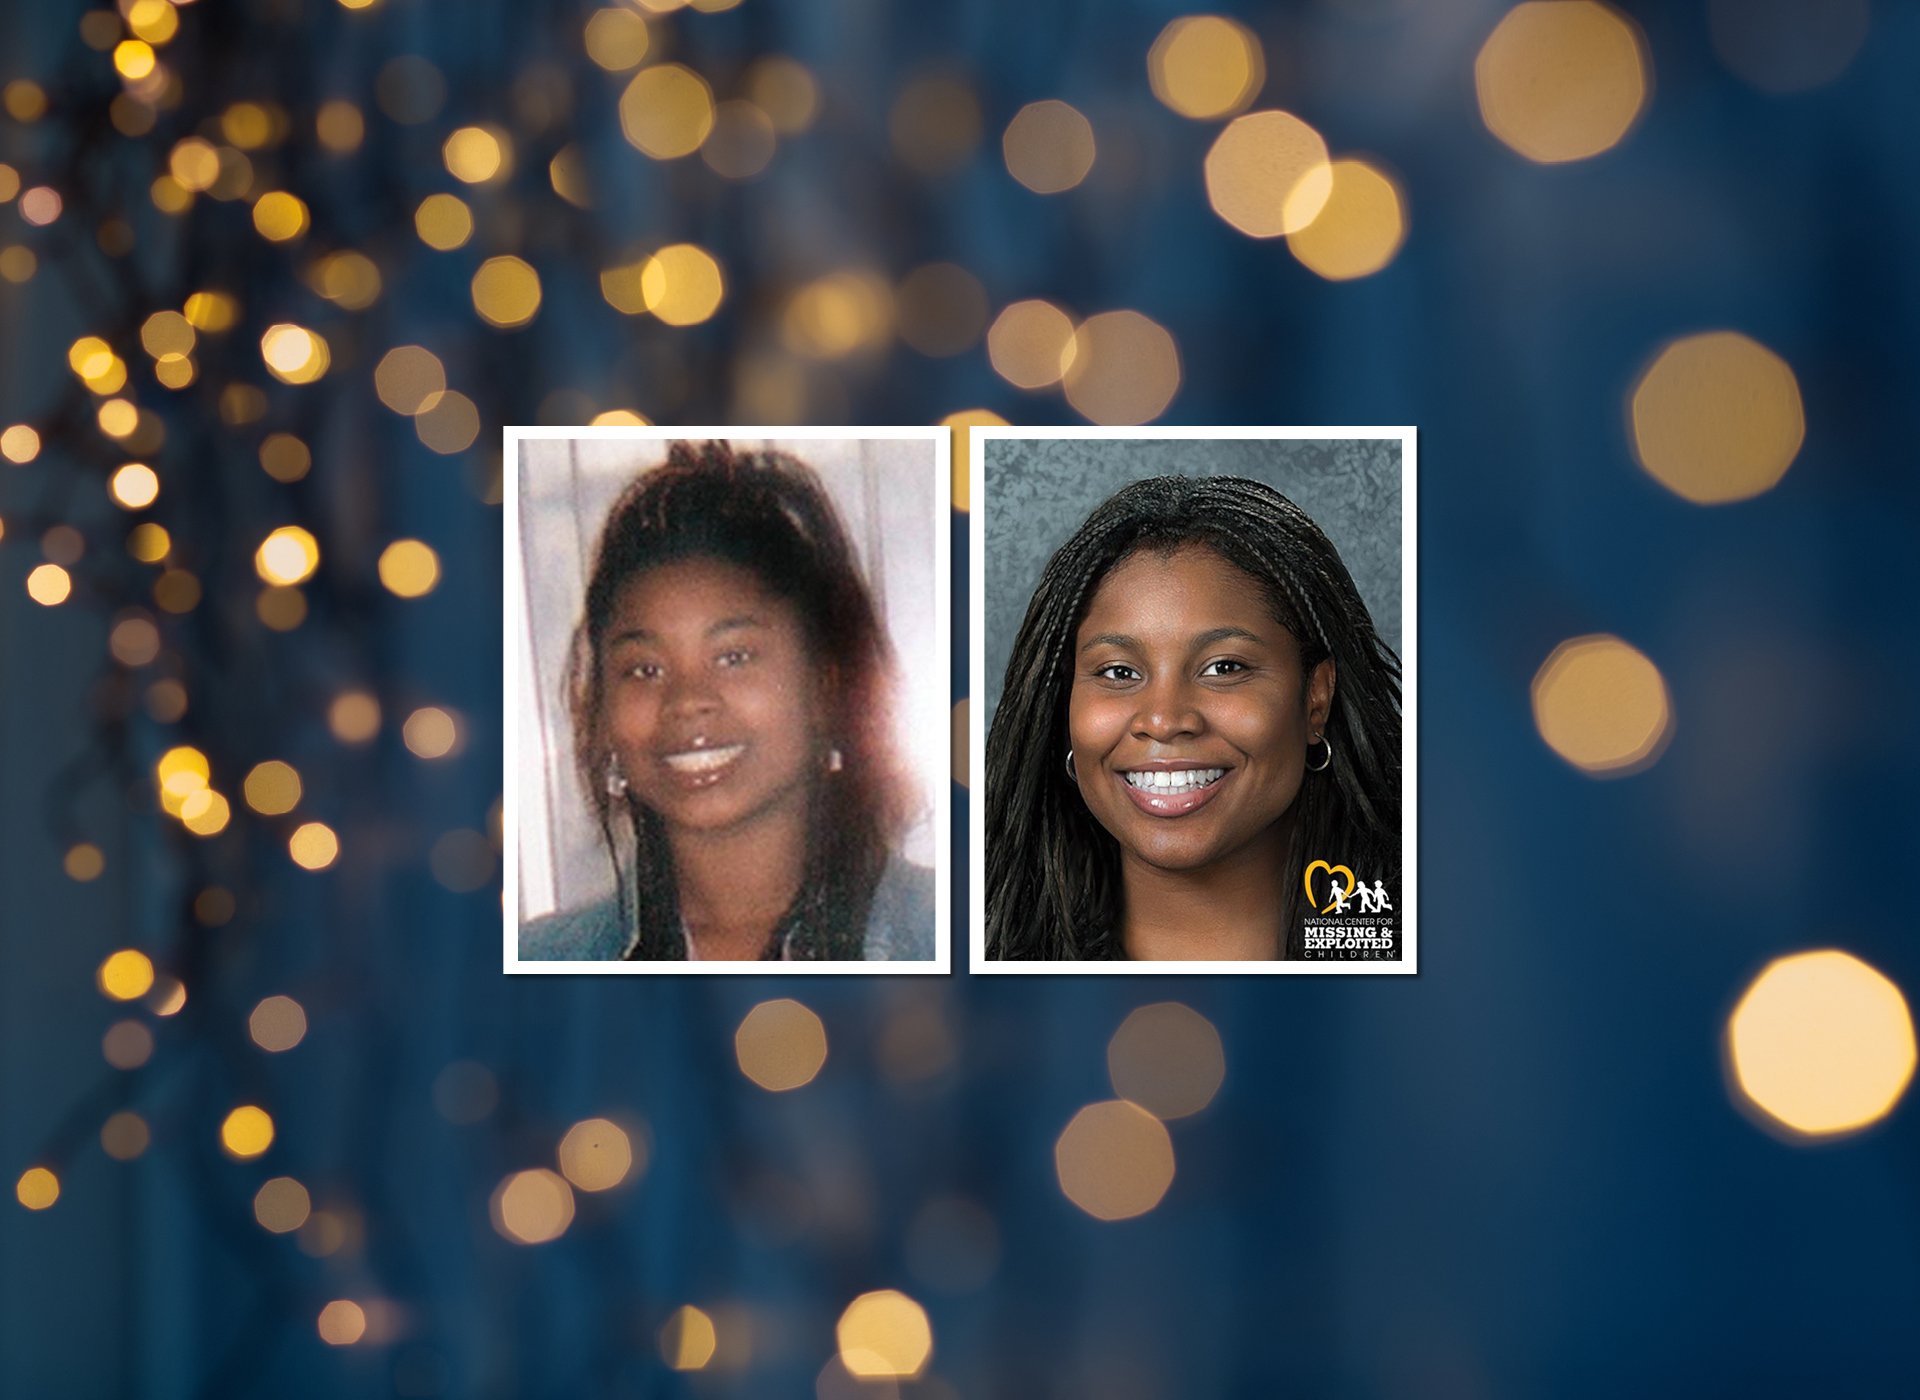 shemika at 16 next to her age progression photo at 31 against a navy blue background with twinkling yellow lights